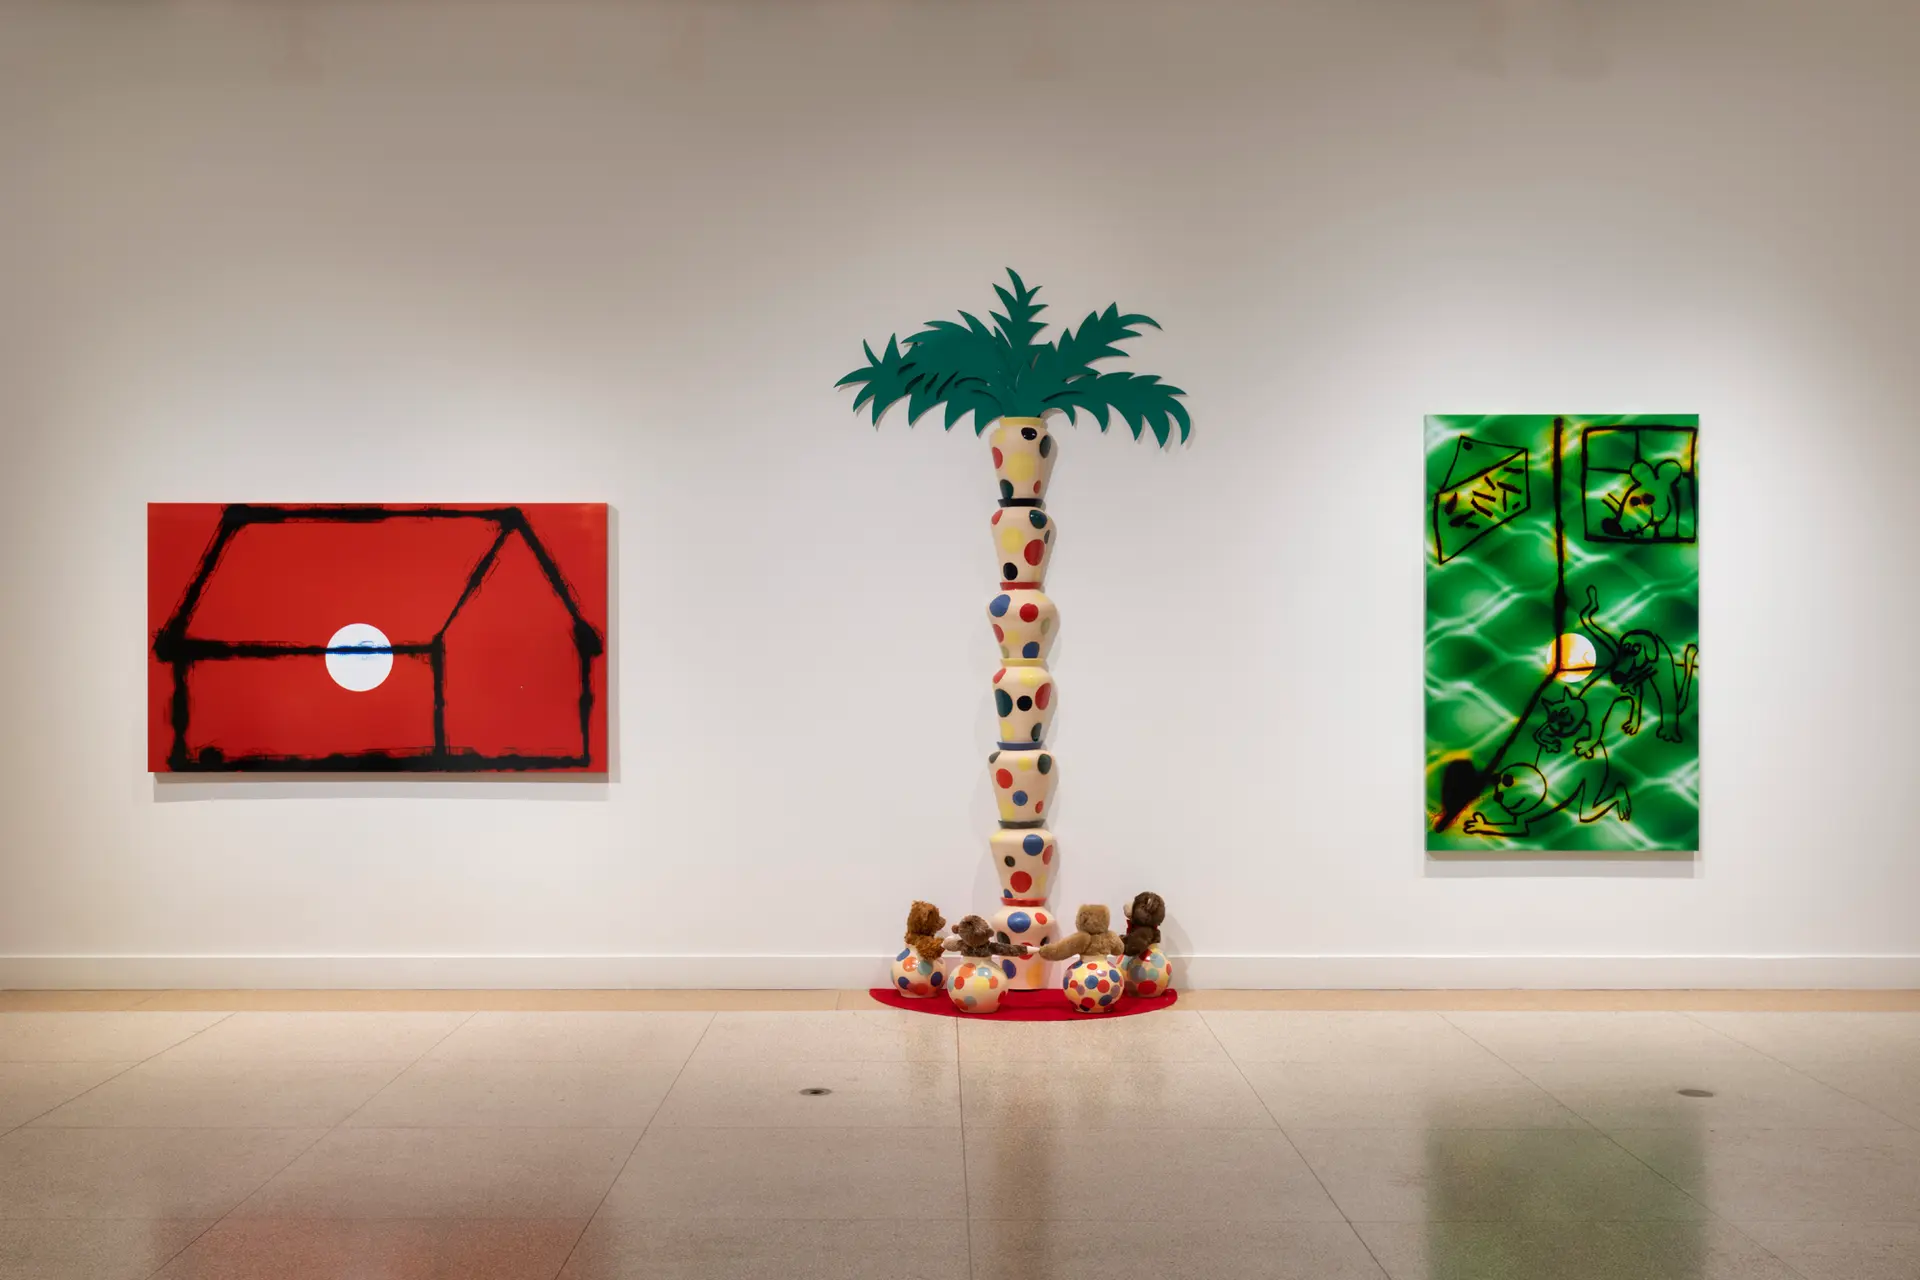 Three artworks are positioned along a gallery wall.  On the left, a rectangular painting with a red background displays the outlines of a house. A painting of cartoon-like images with a green, patterned background hangs on the right. Between these two paintings is a colorful sculpture showing a palm tree and small animals at its base.